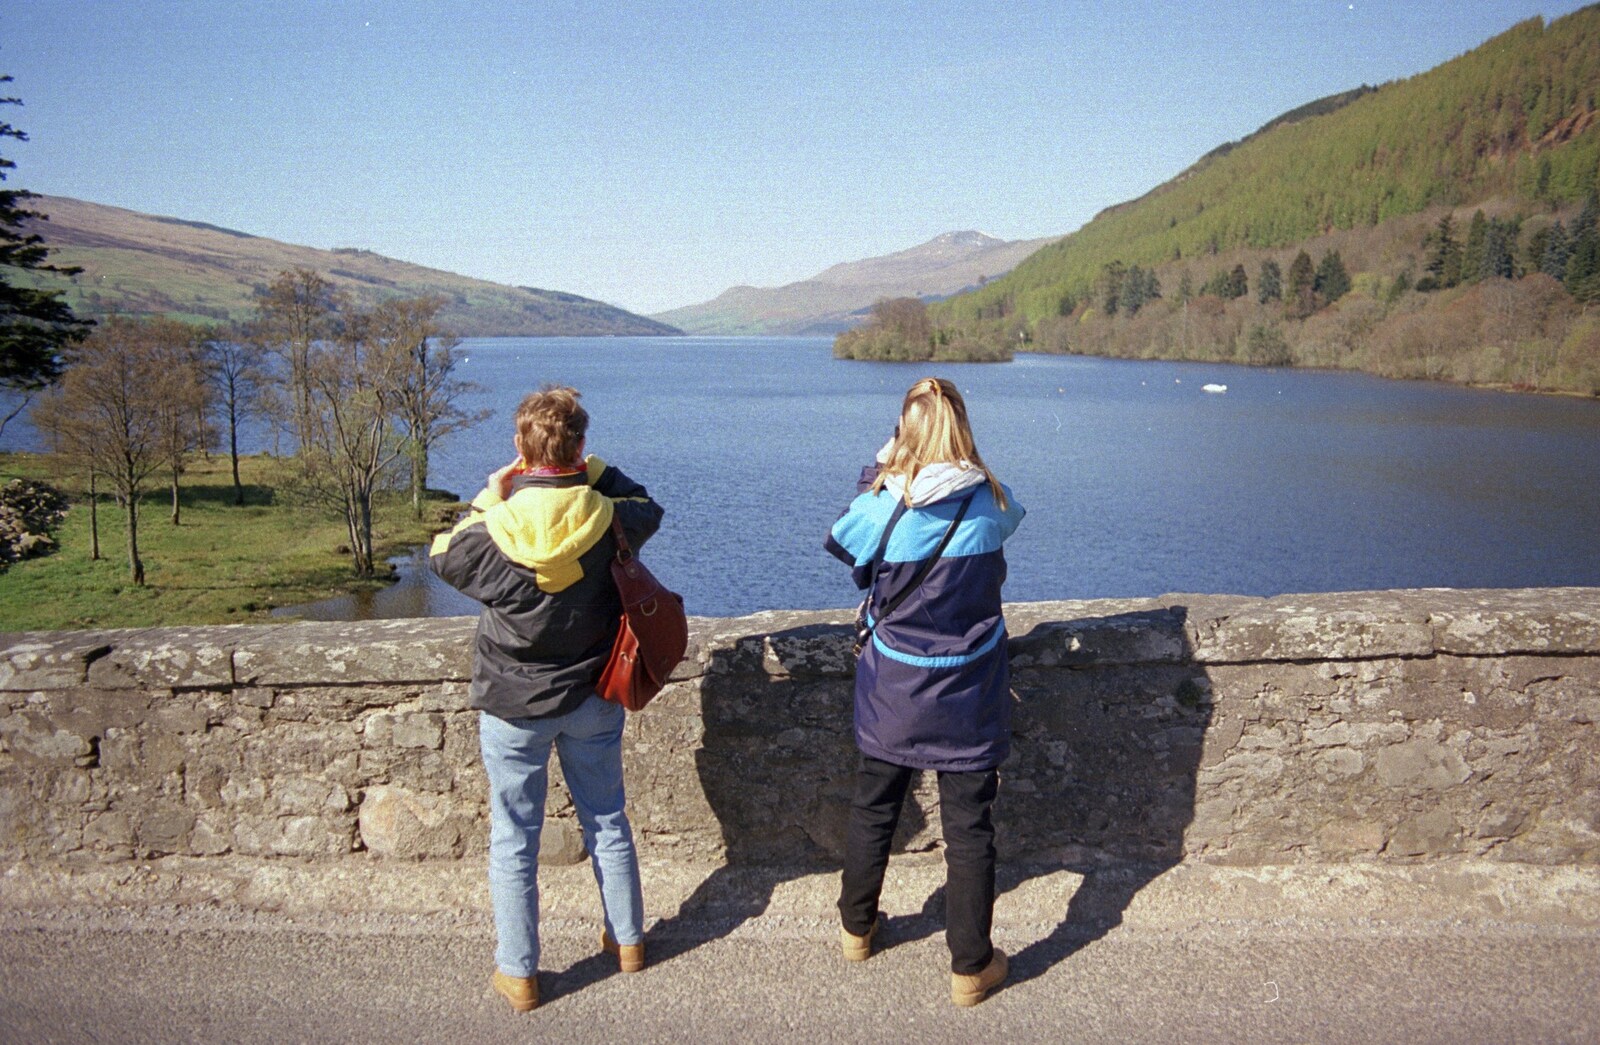 Isabelle and Carole look out across the loch from A Trip to Pitlochry, Scotland - 24th March 1998